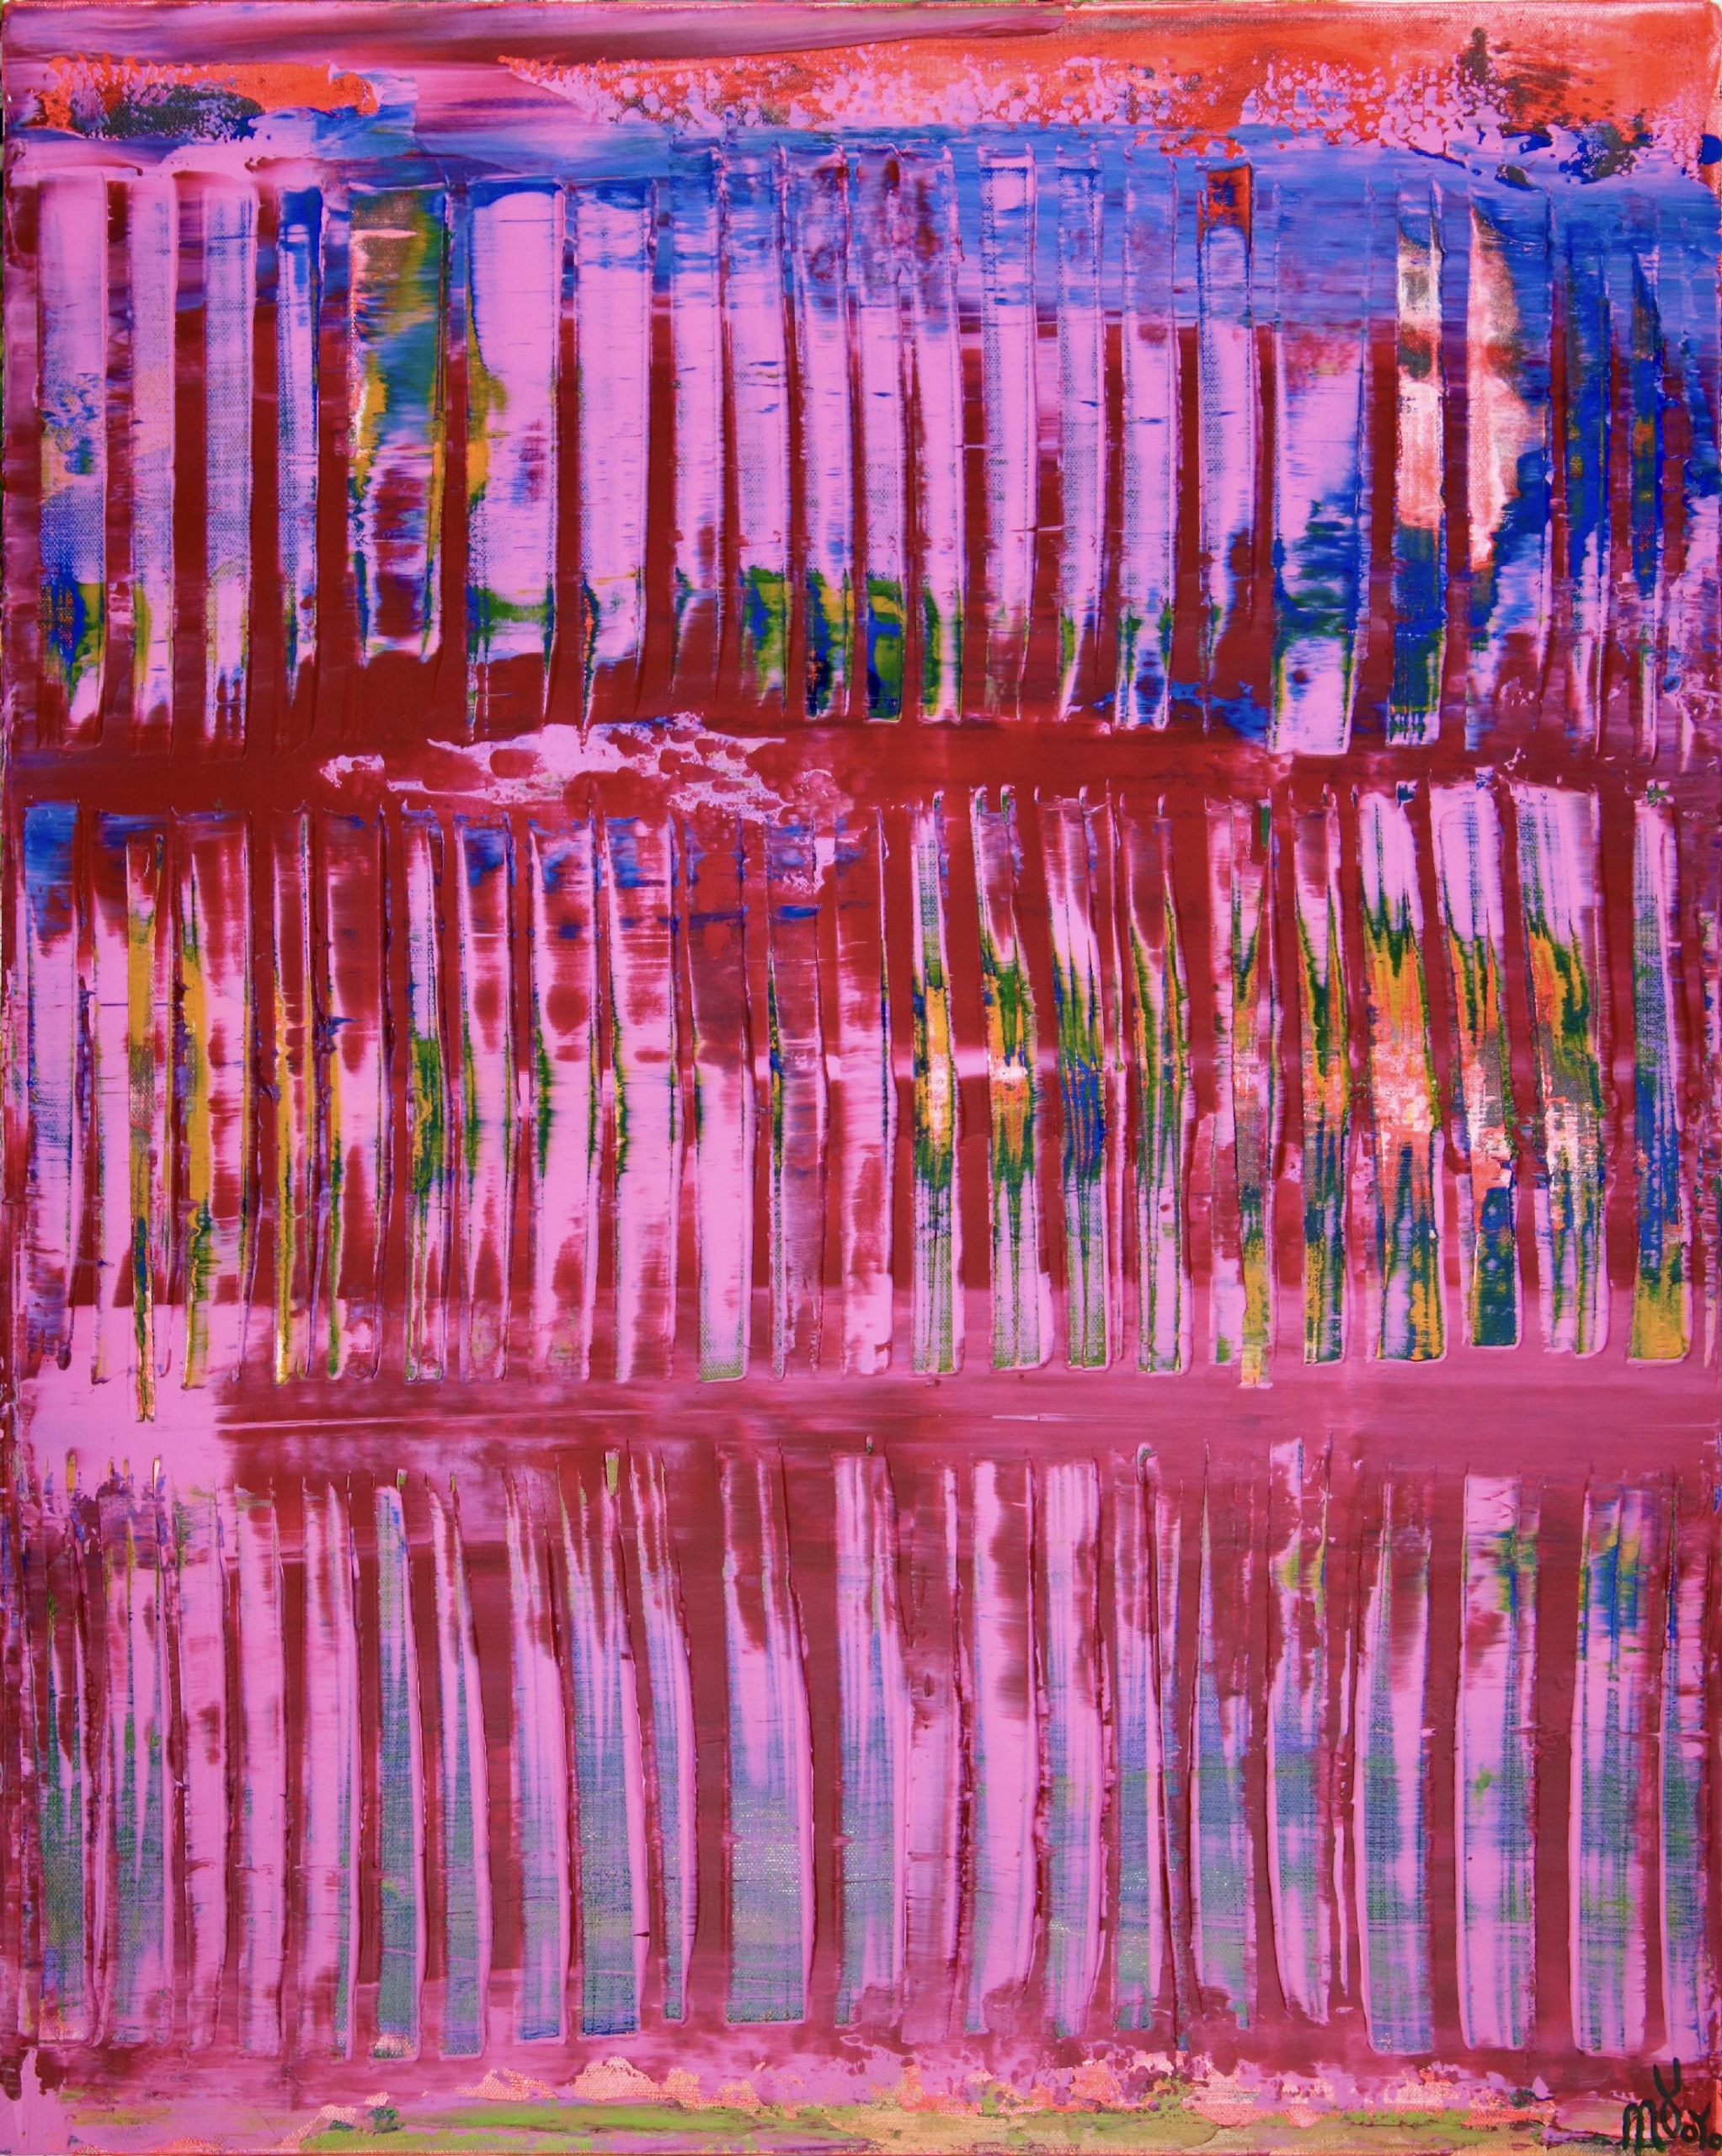 Full Canvas View - Pink Takeover (Blue Lights) 2020 by Nestor Toro